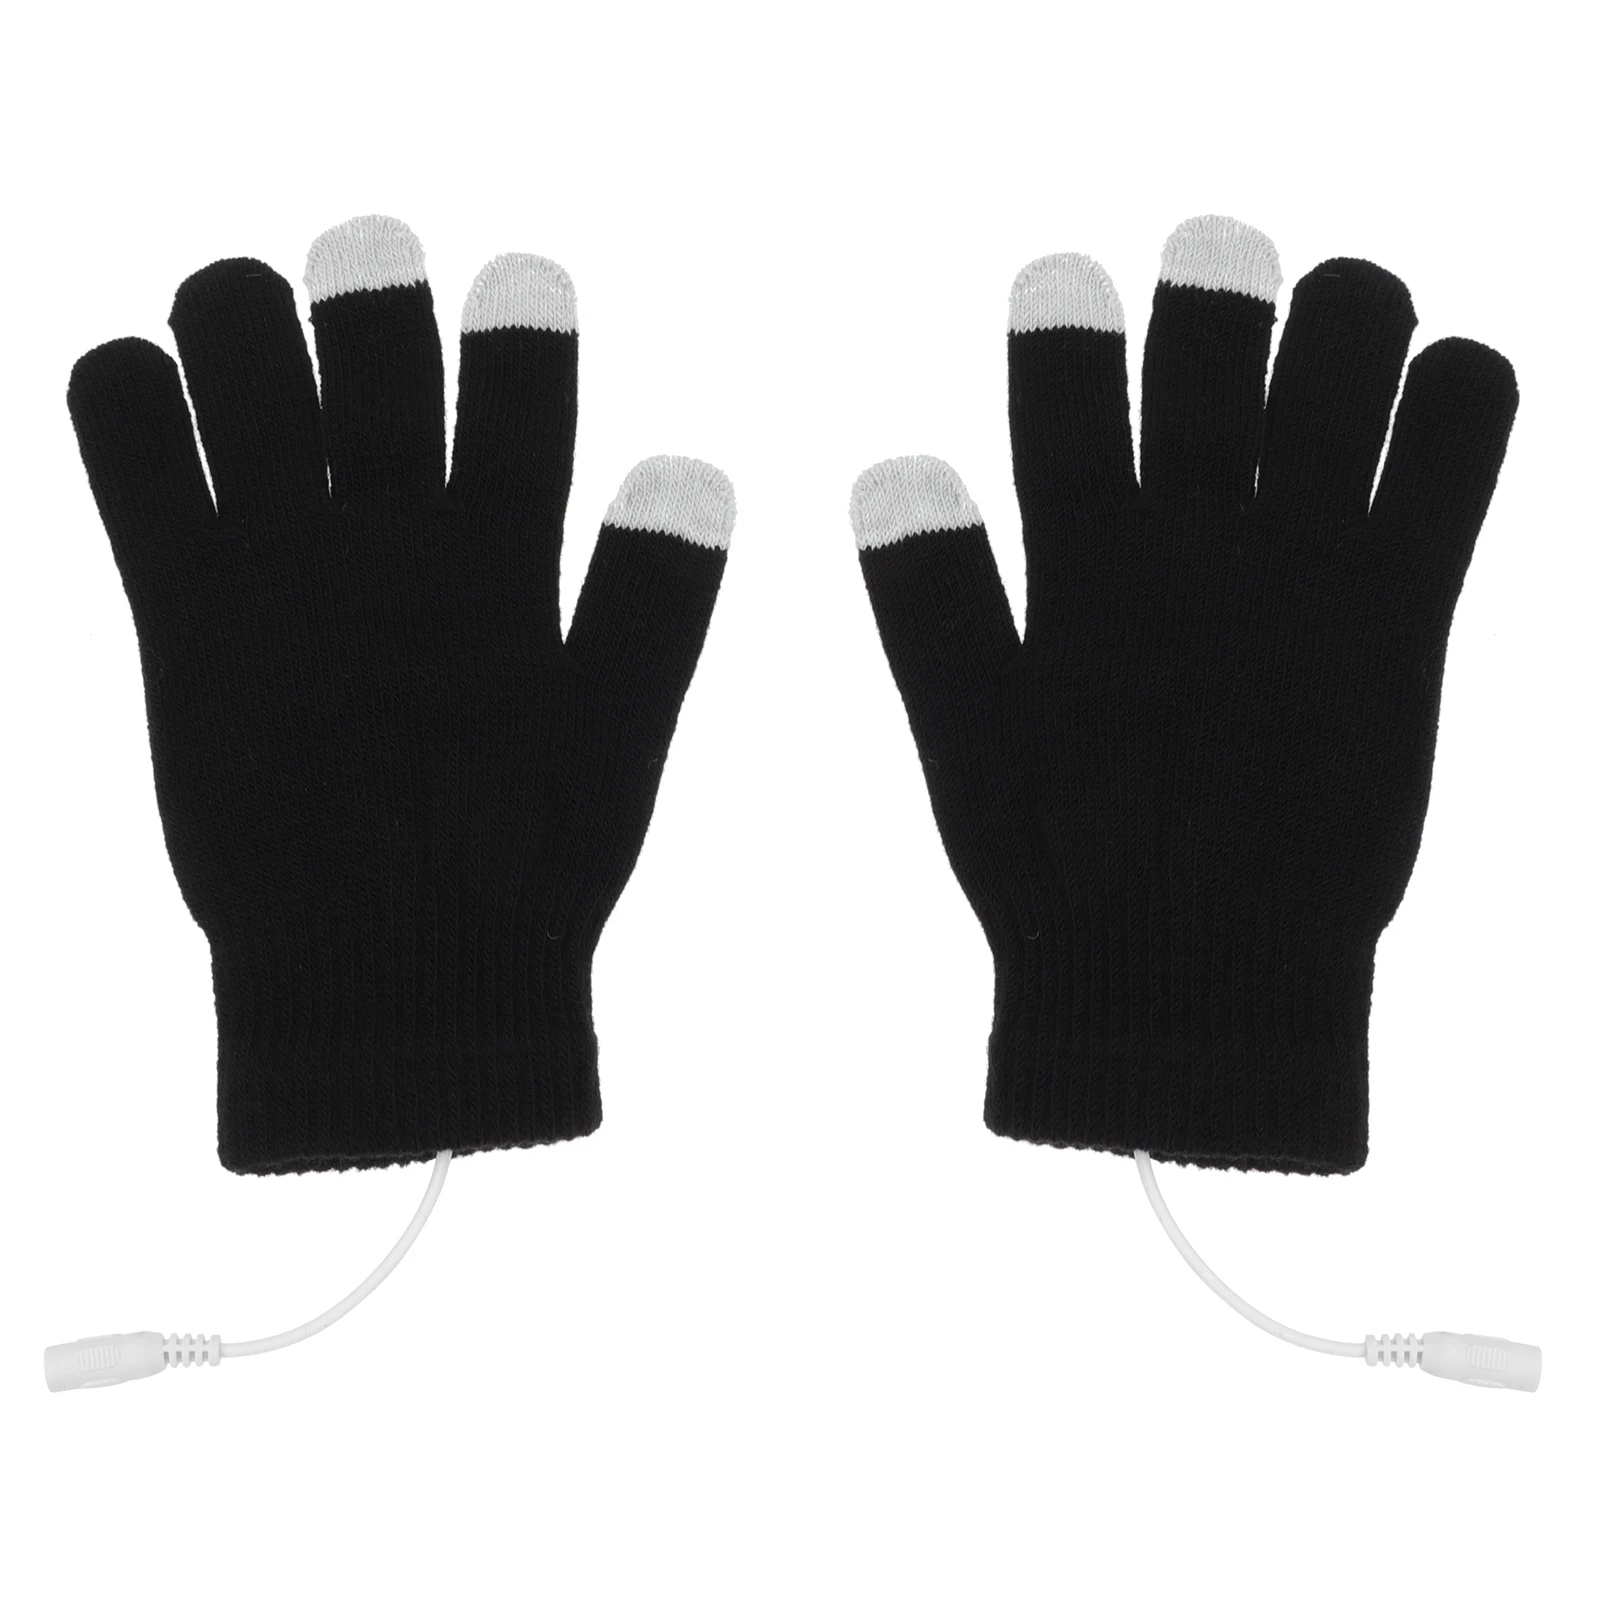 Heating Gloves USB Heated Touch Screen Mittens Cotton Gloves Unisex Winter Typing Touch Screen Cold Protective Hand Gloves men heated gloves rechargeable usb hand warmer electric heating gloves winter cycling thermal touch screen bike gloves windproof